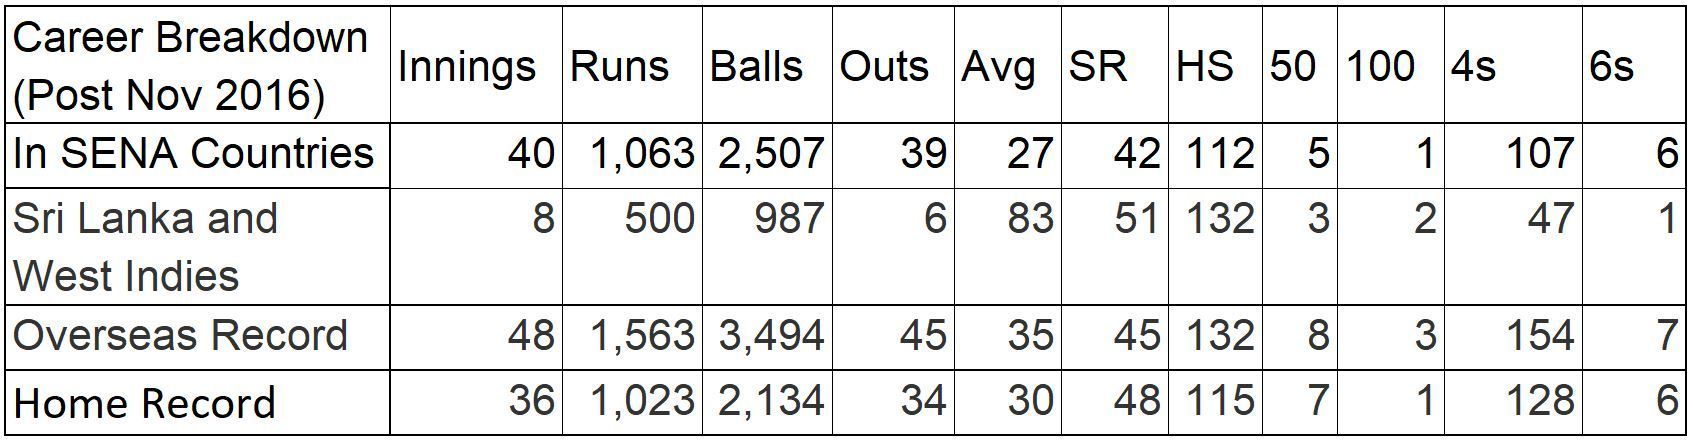 Rahane&#039;s Stats in home and overseas conditions after November 2016